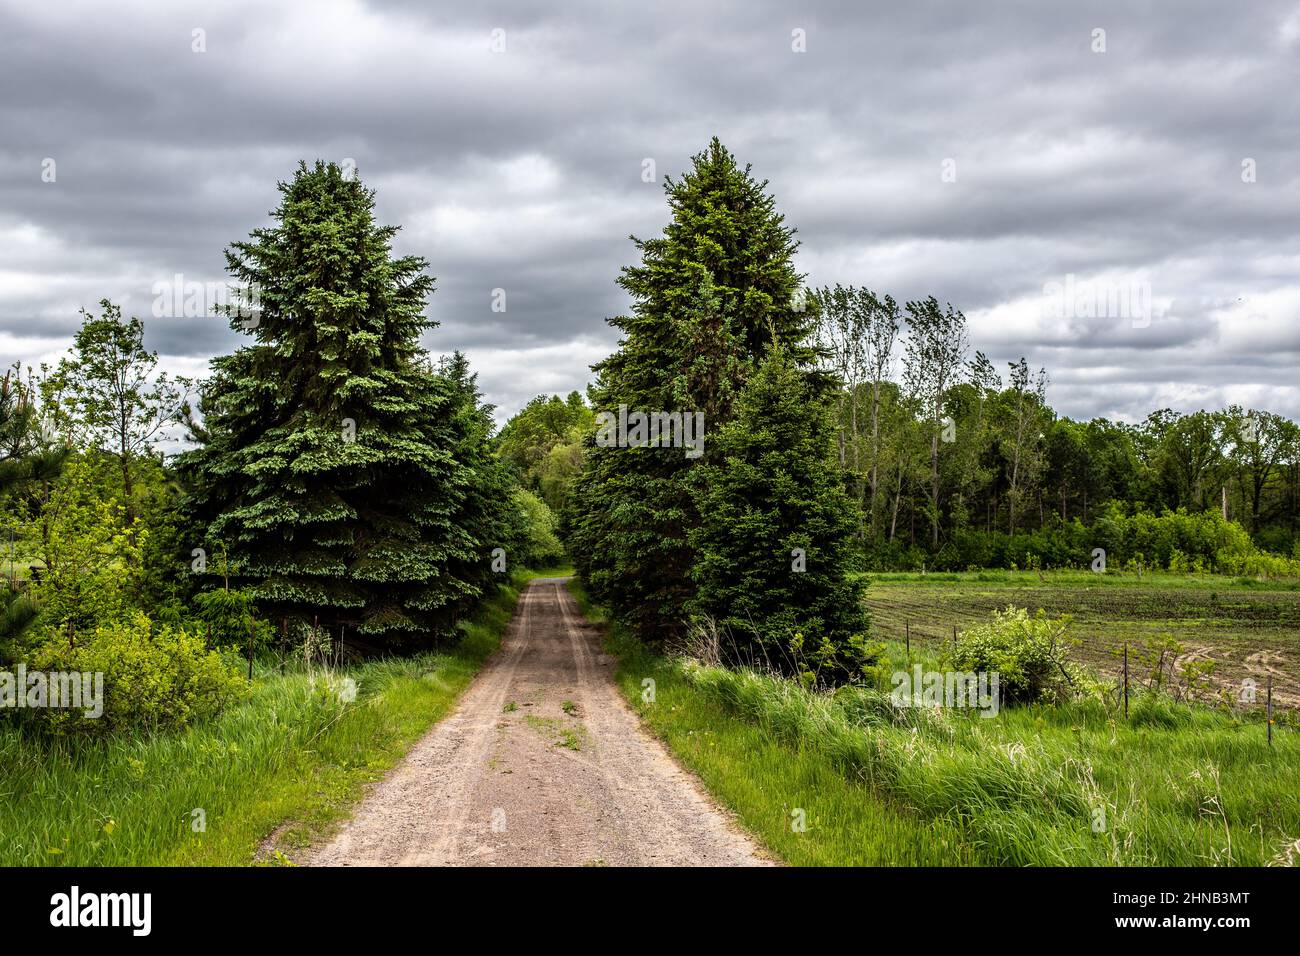 Row of evergreen trees lining a gravel driveway with trees and a field to the right. Stock Photo